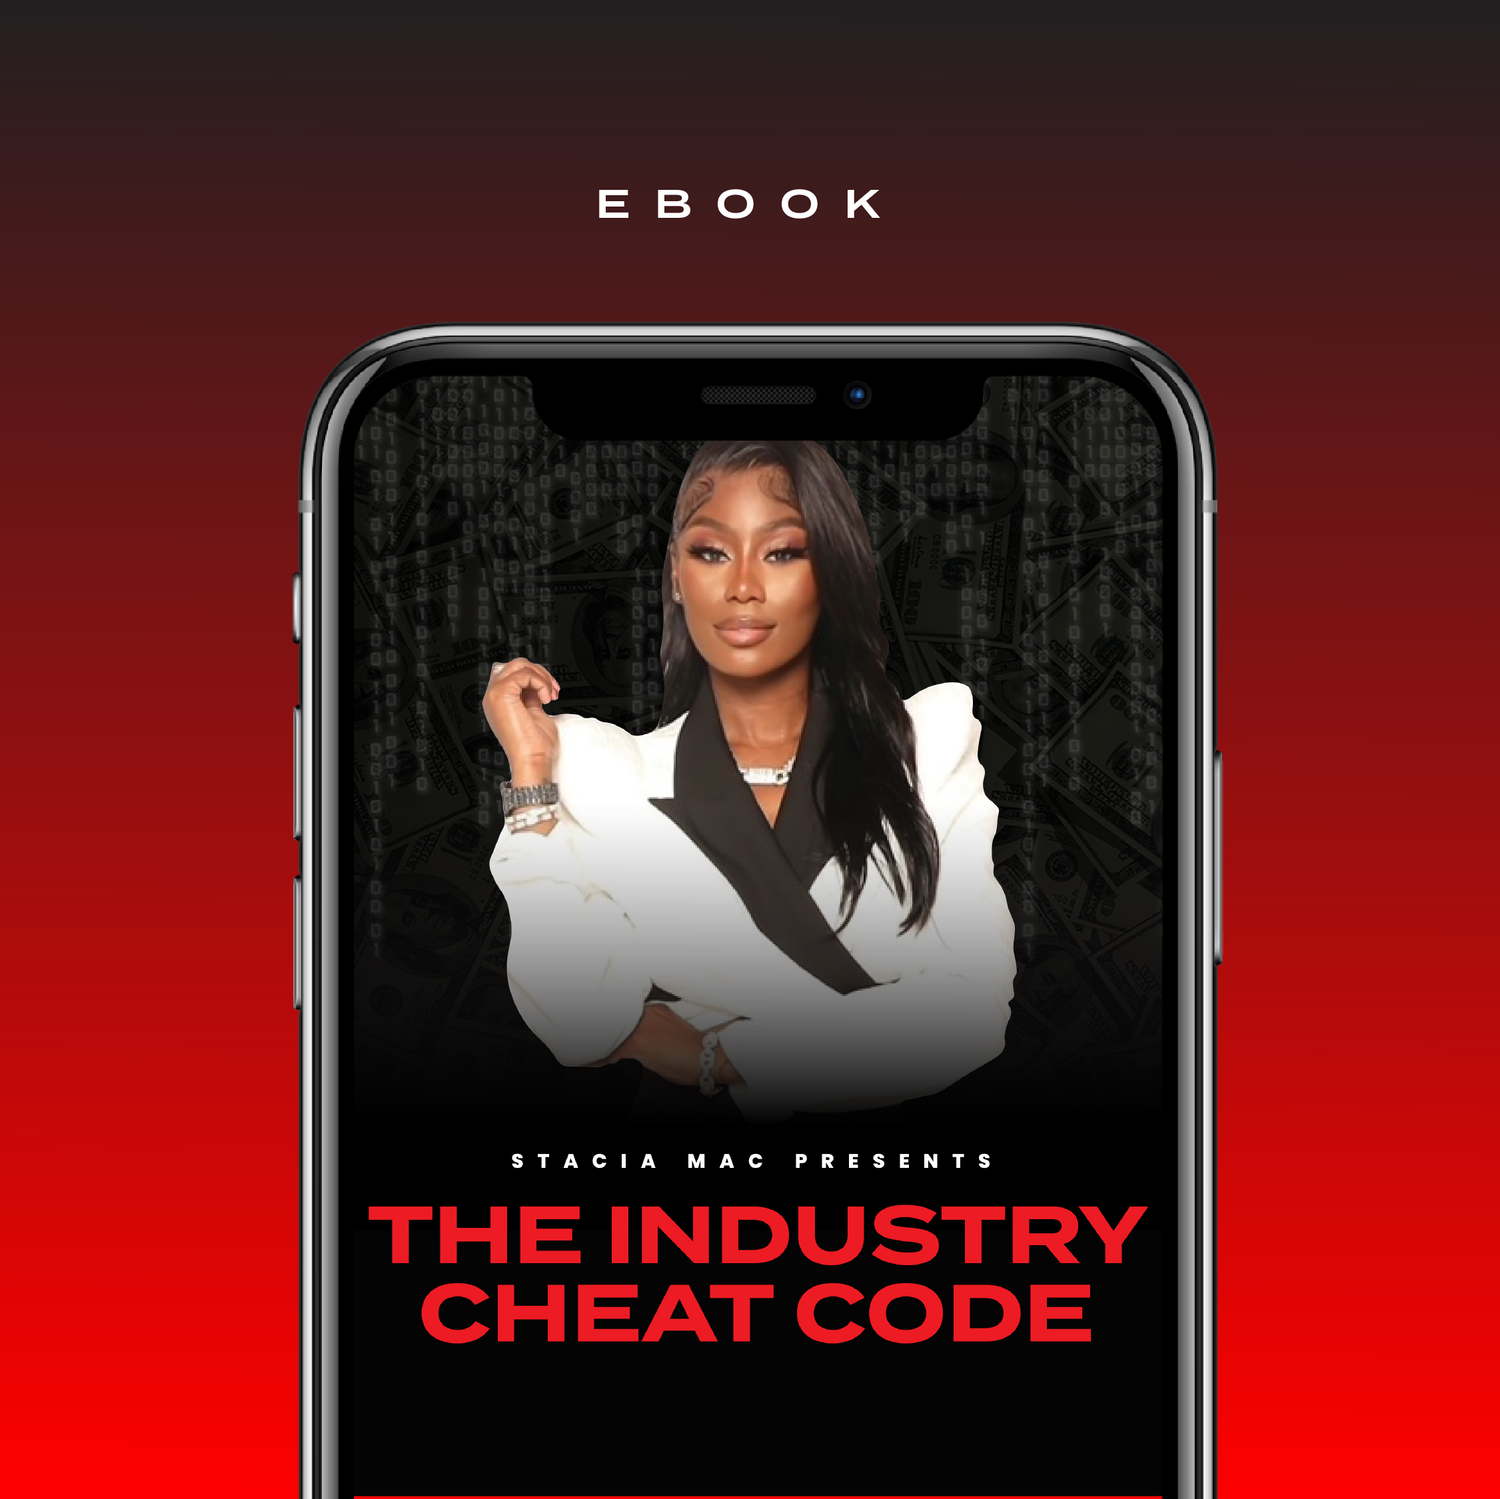 The Industry Cheat Code